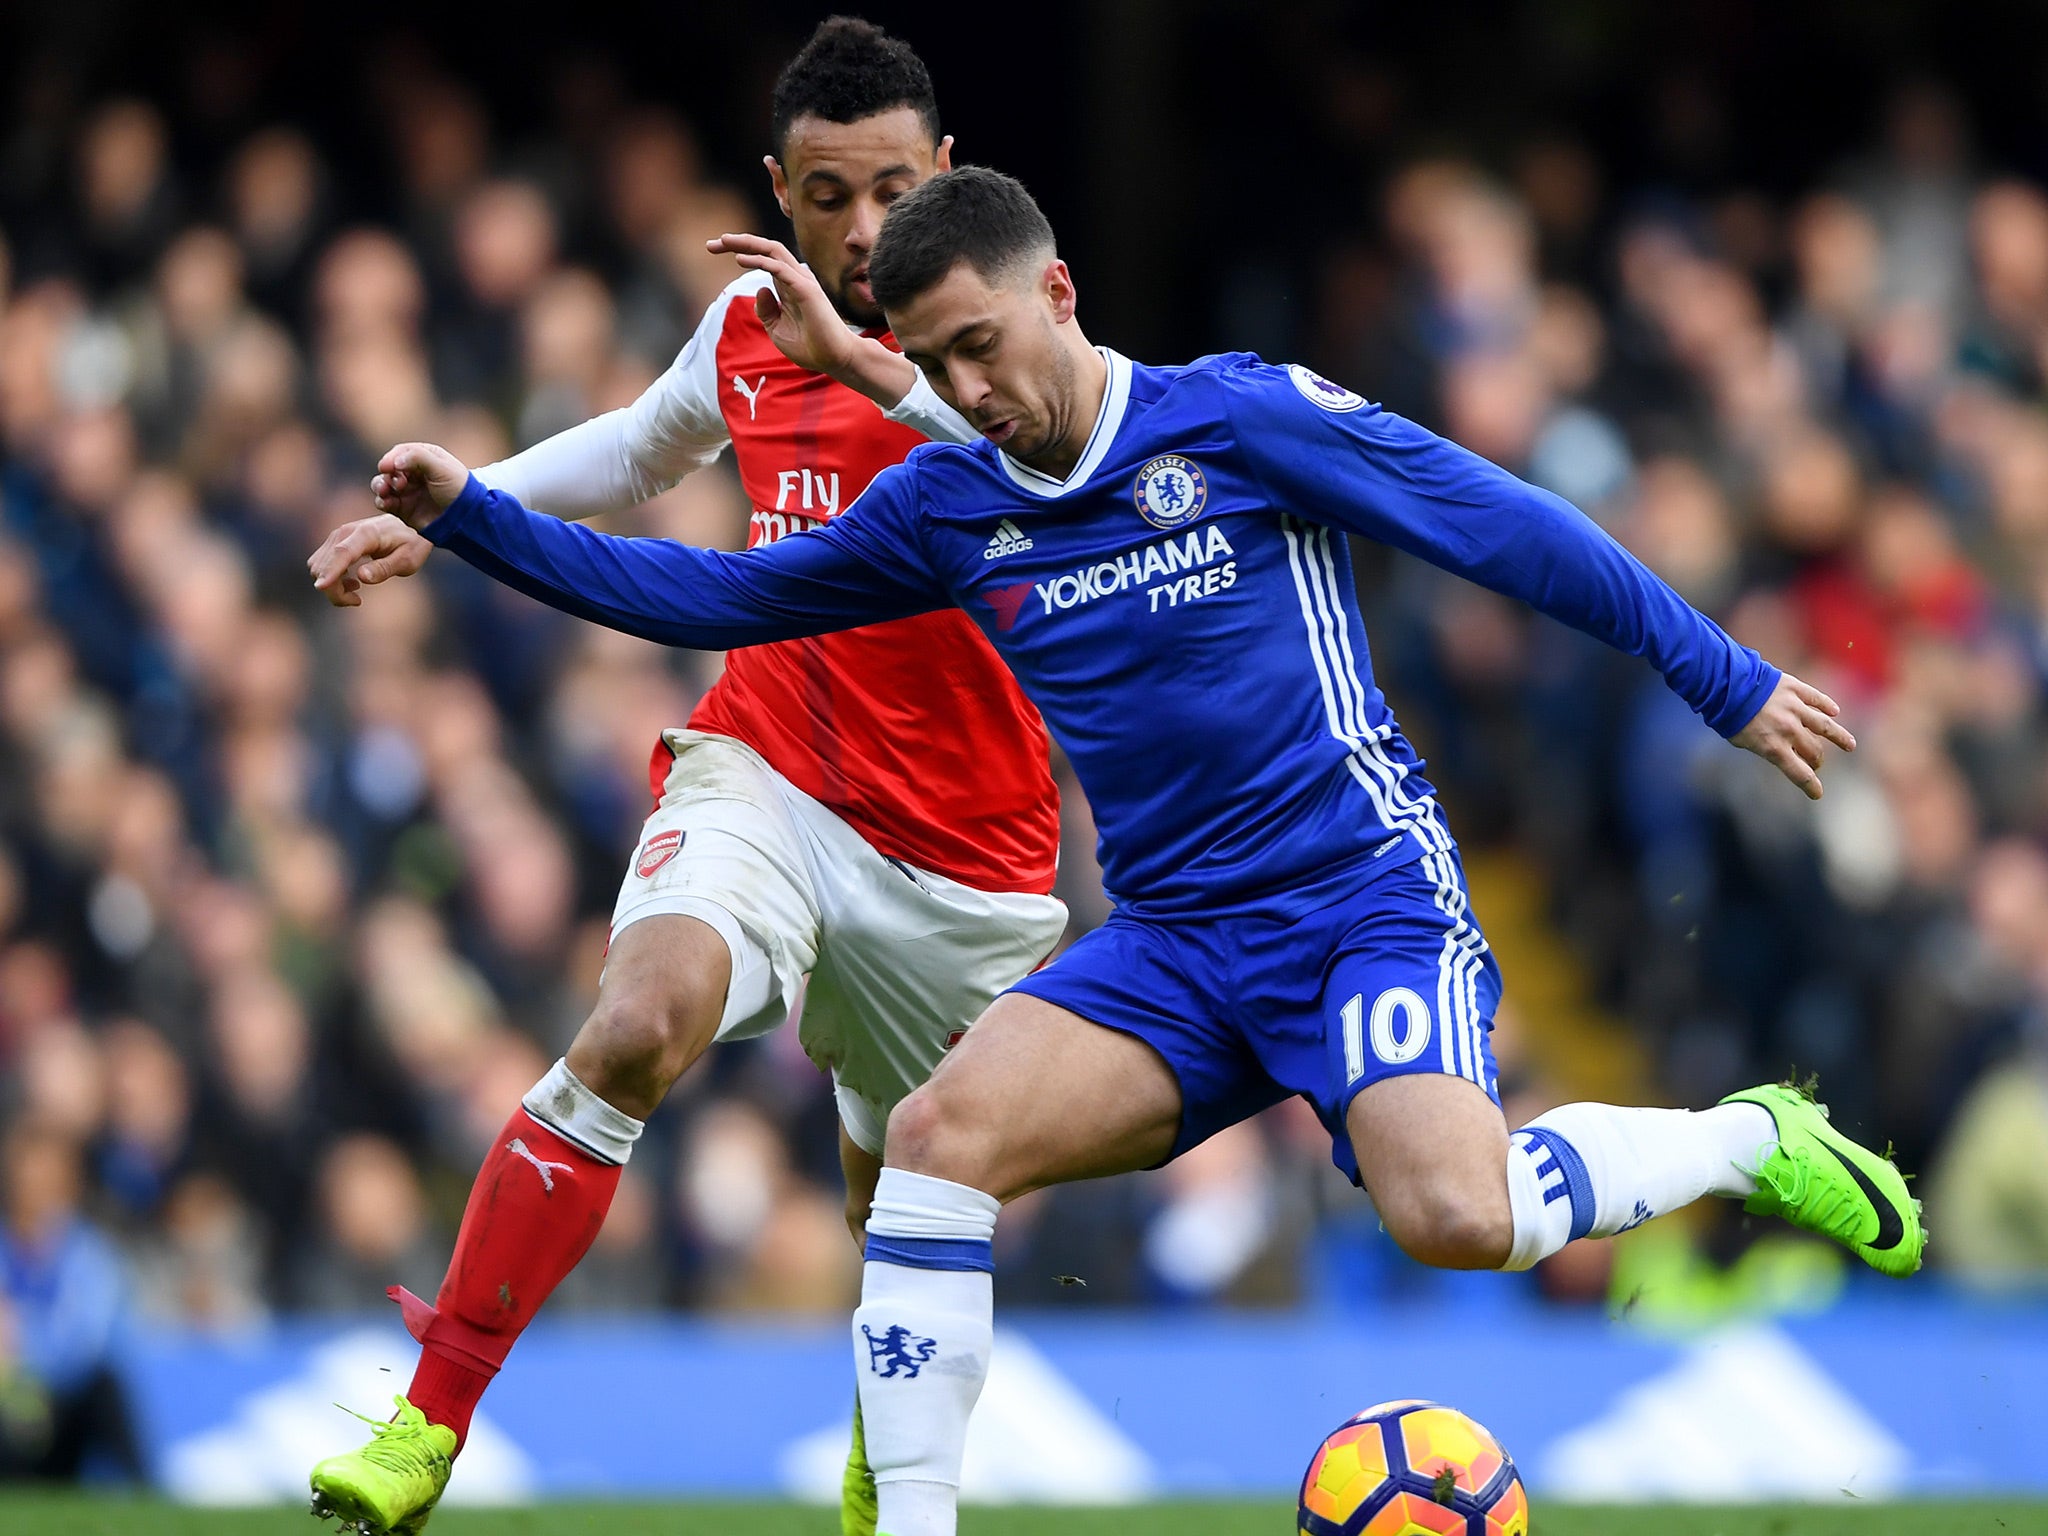 Eden Hazard announced his return to top form with a stunning goal against Arsenal in February